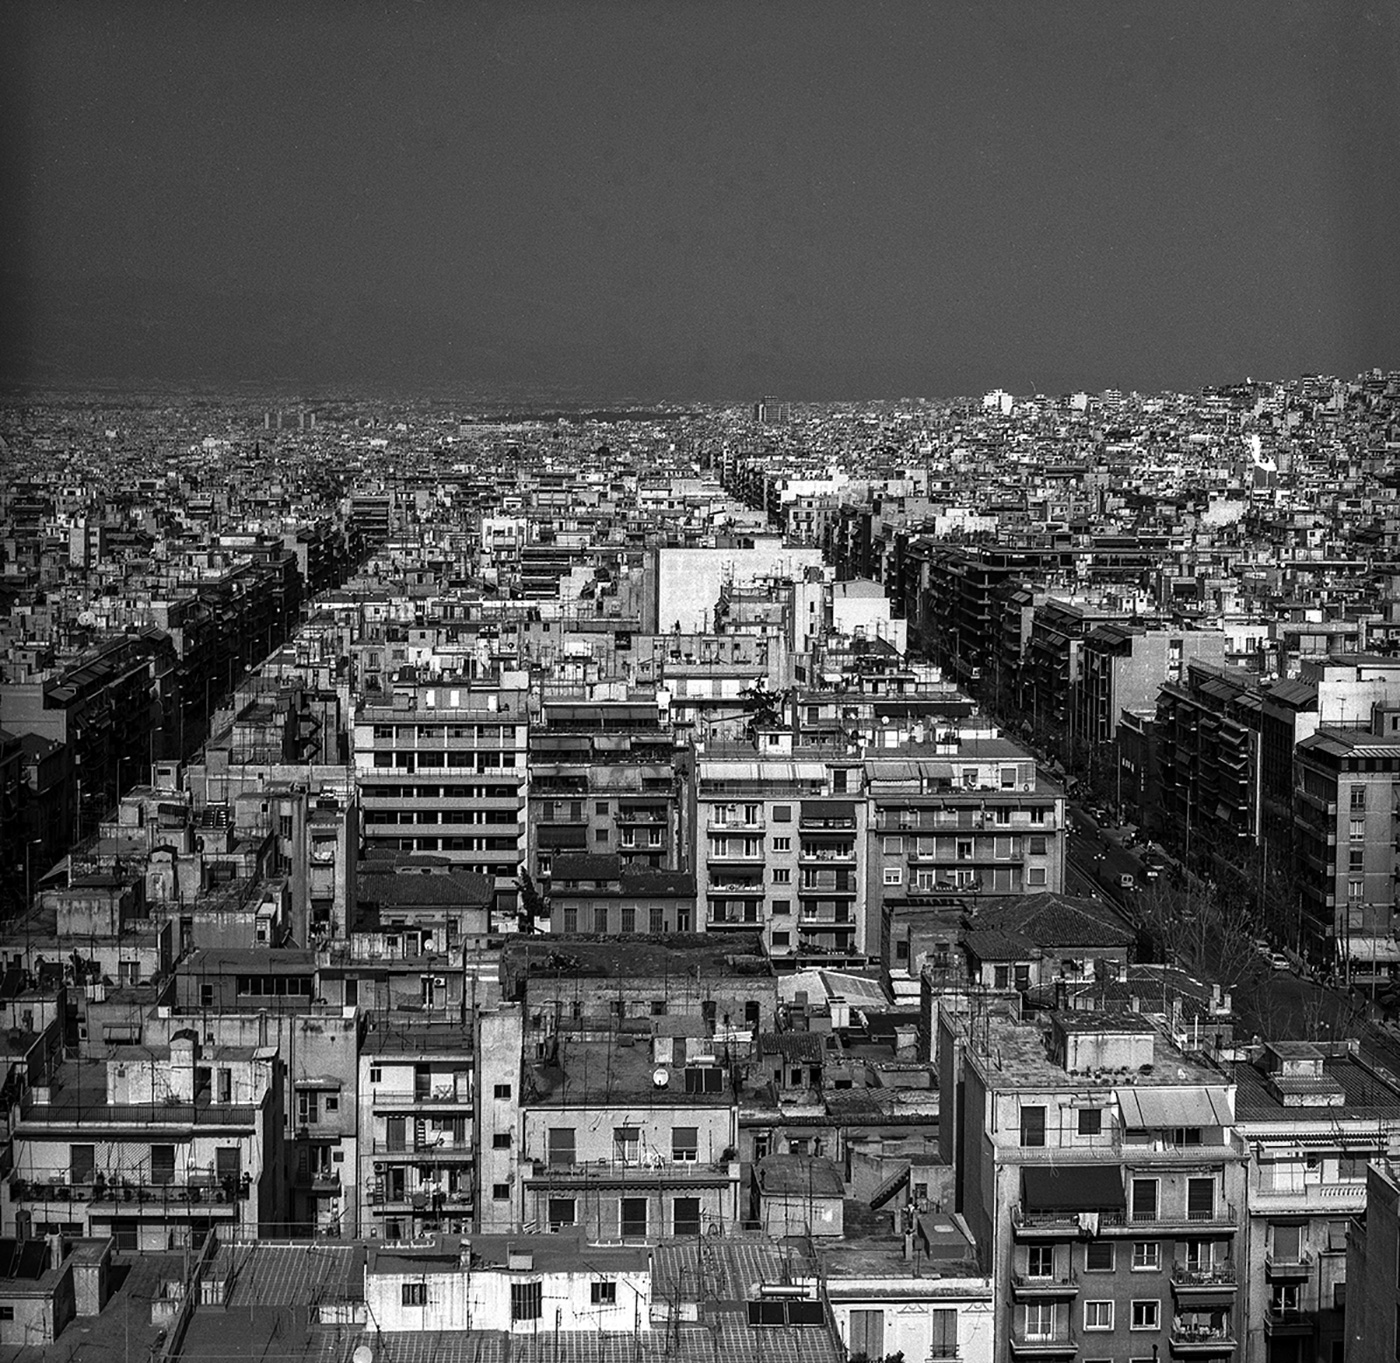 Housing Production and Energy Use in Greece Insights from History and New Social Challenges